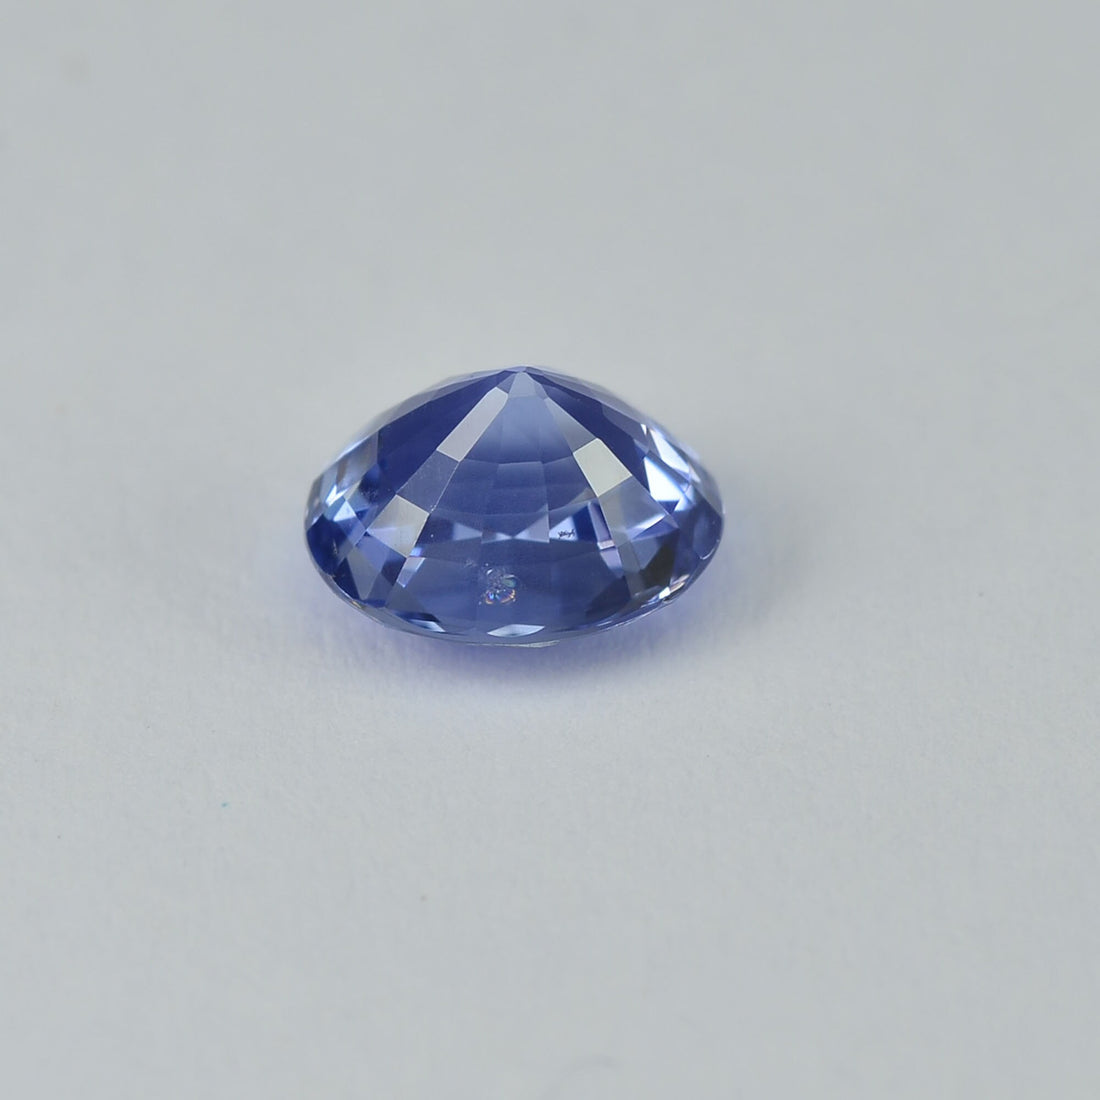 0.98 cts Unheated Blue Sapphire Loose Gemstone Oval Cut Certified